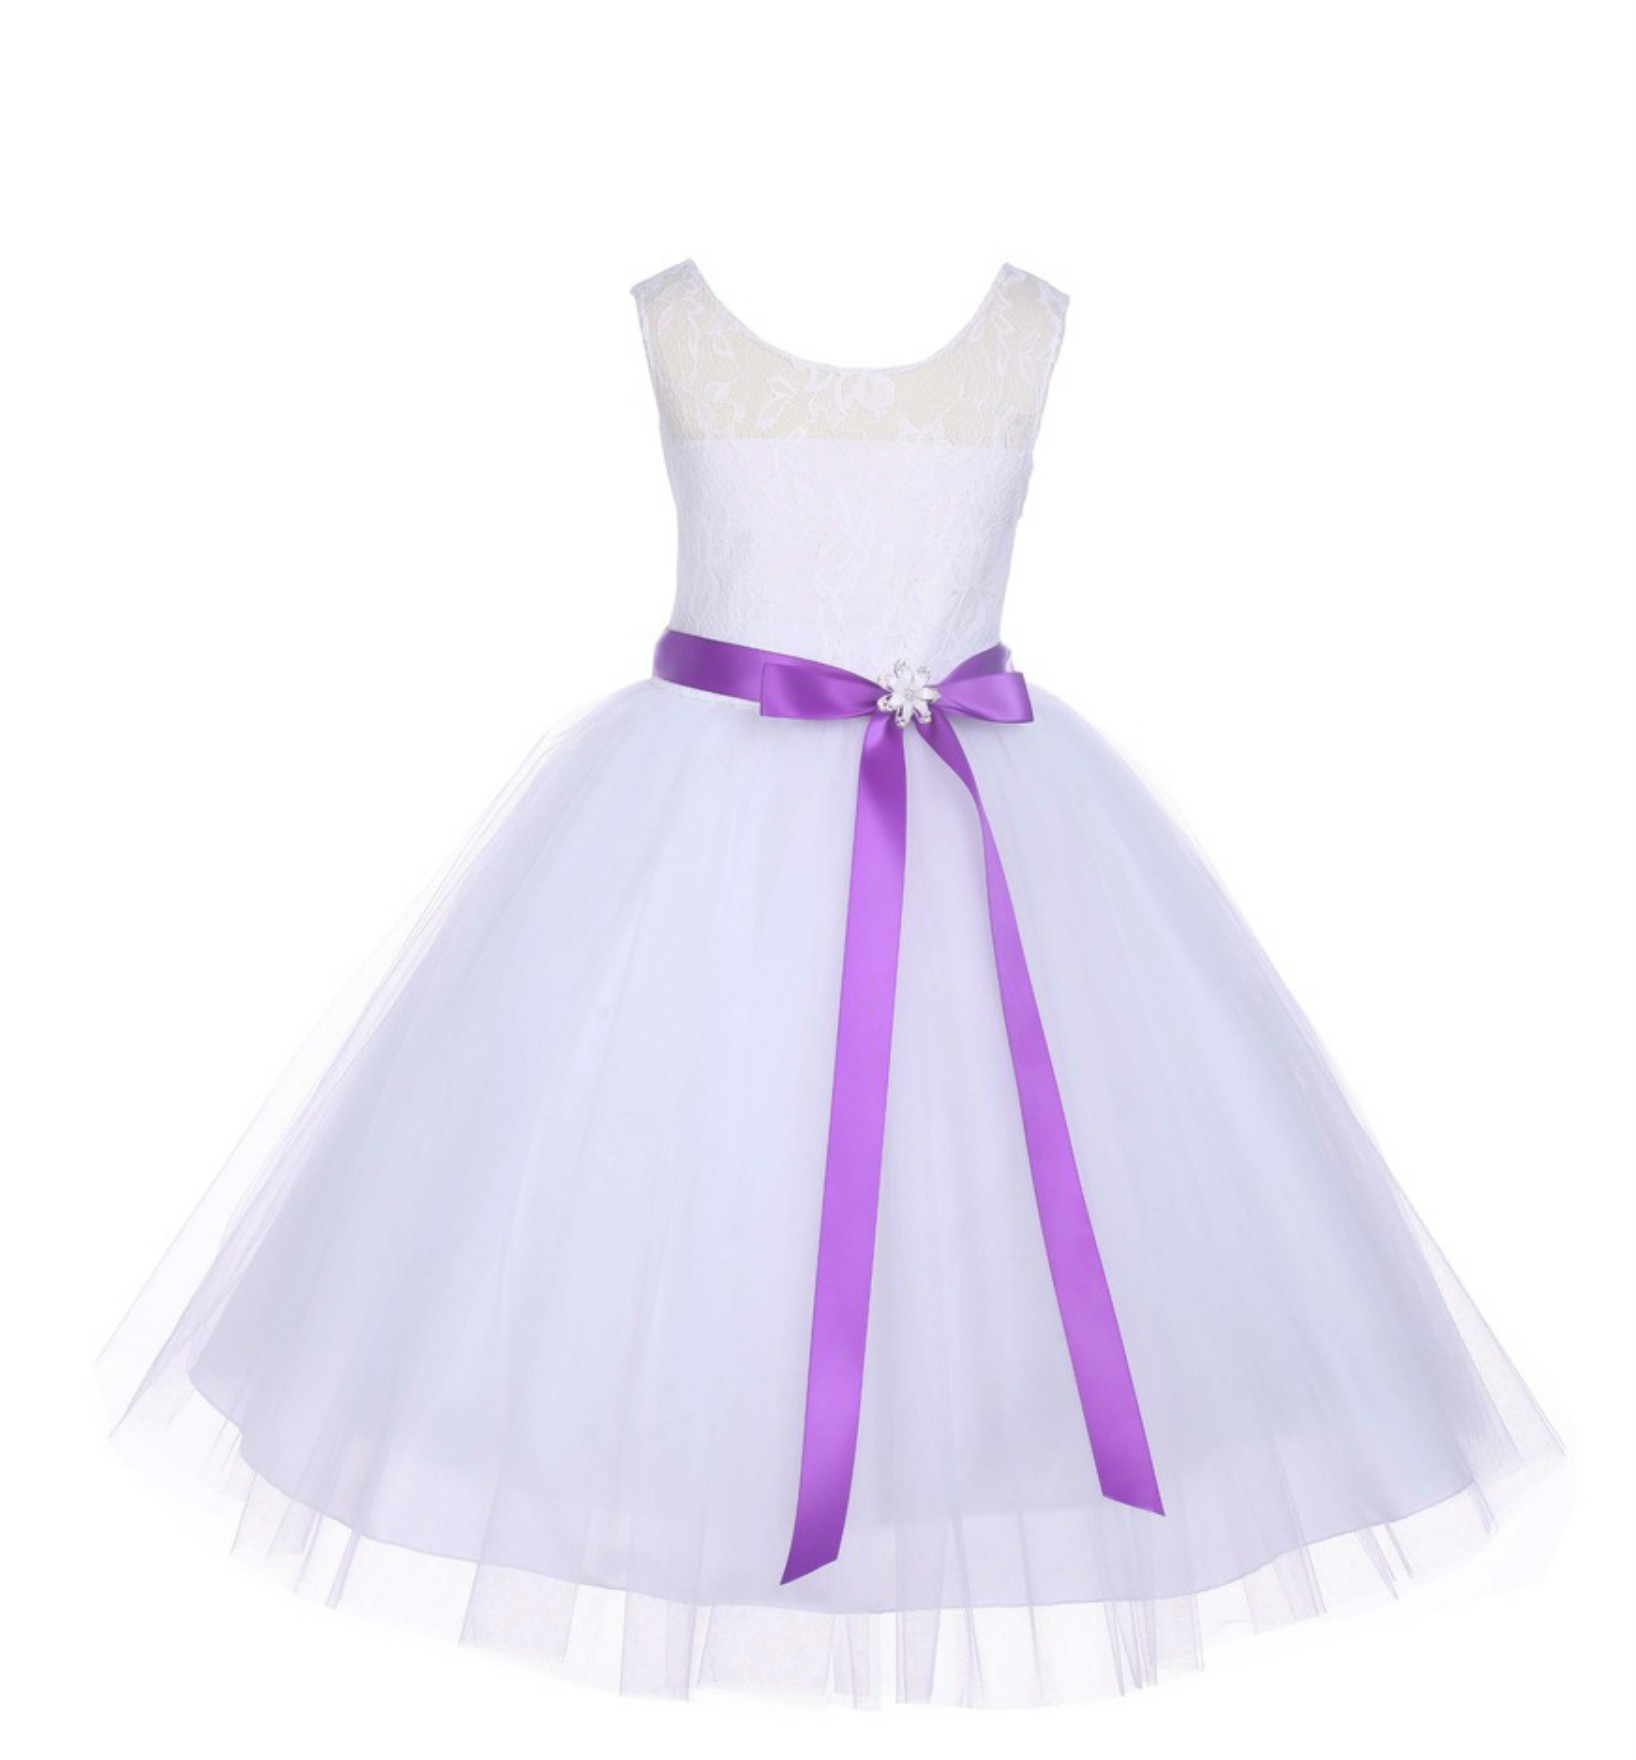 White Floral Lace Bodice Tulle Purple Ribbon Flower Girl Dress 153R